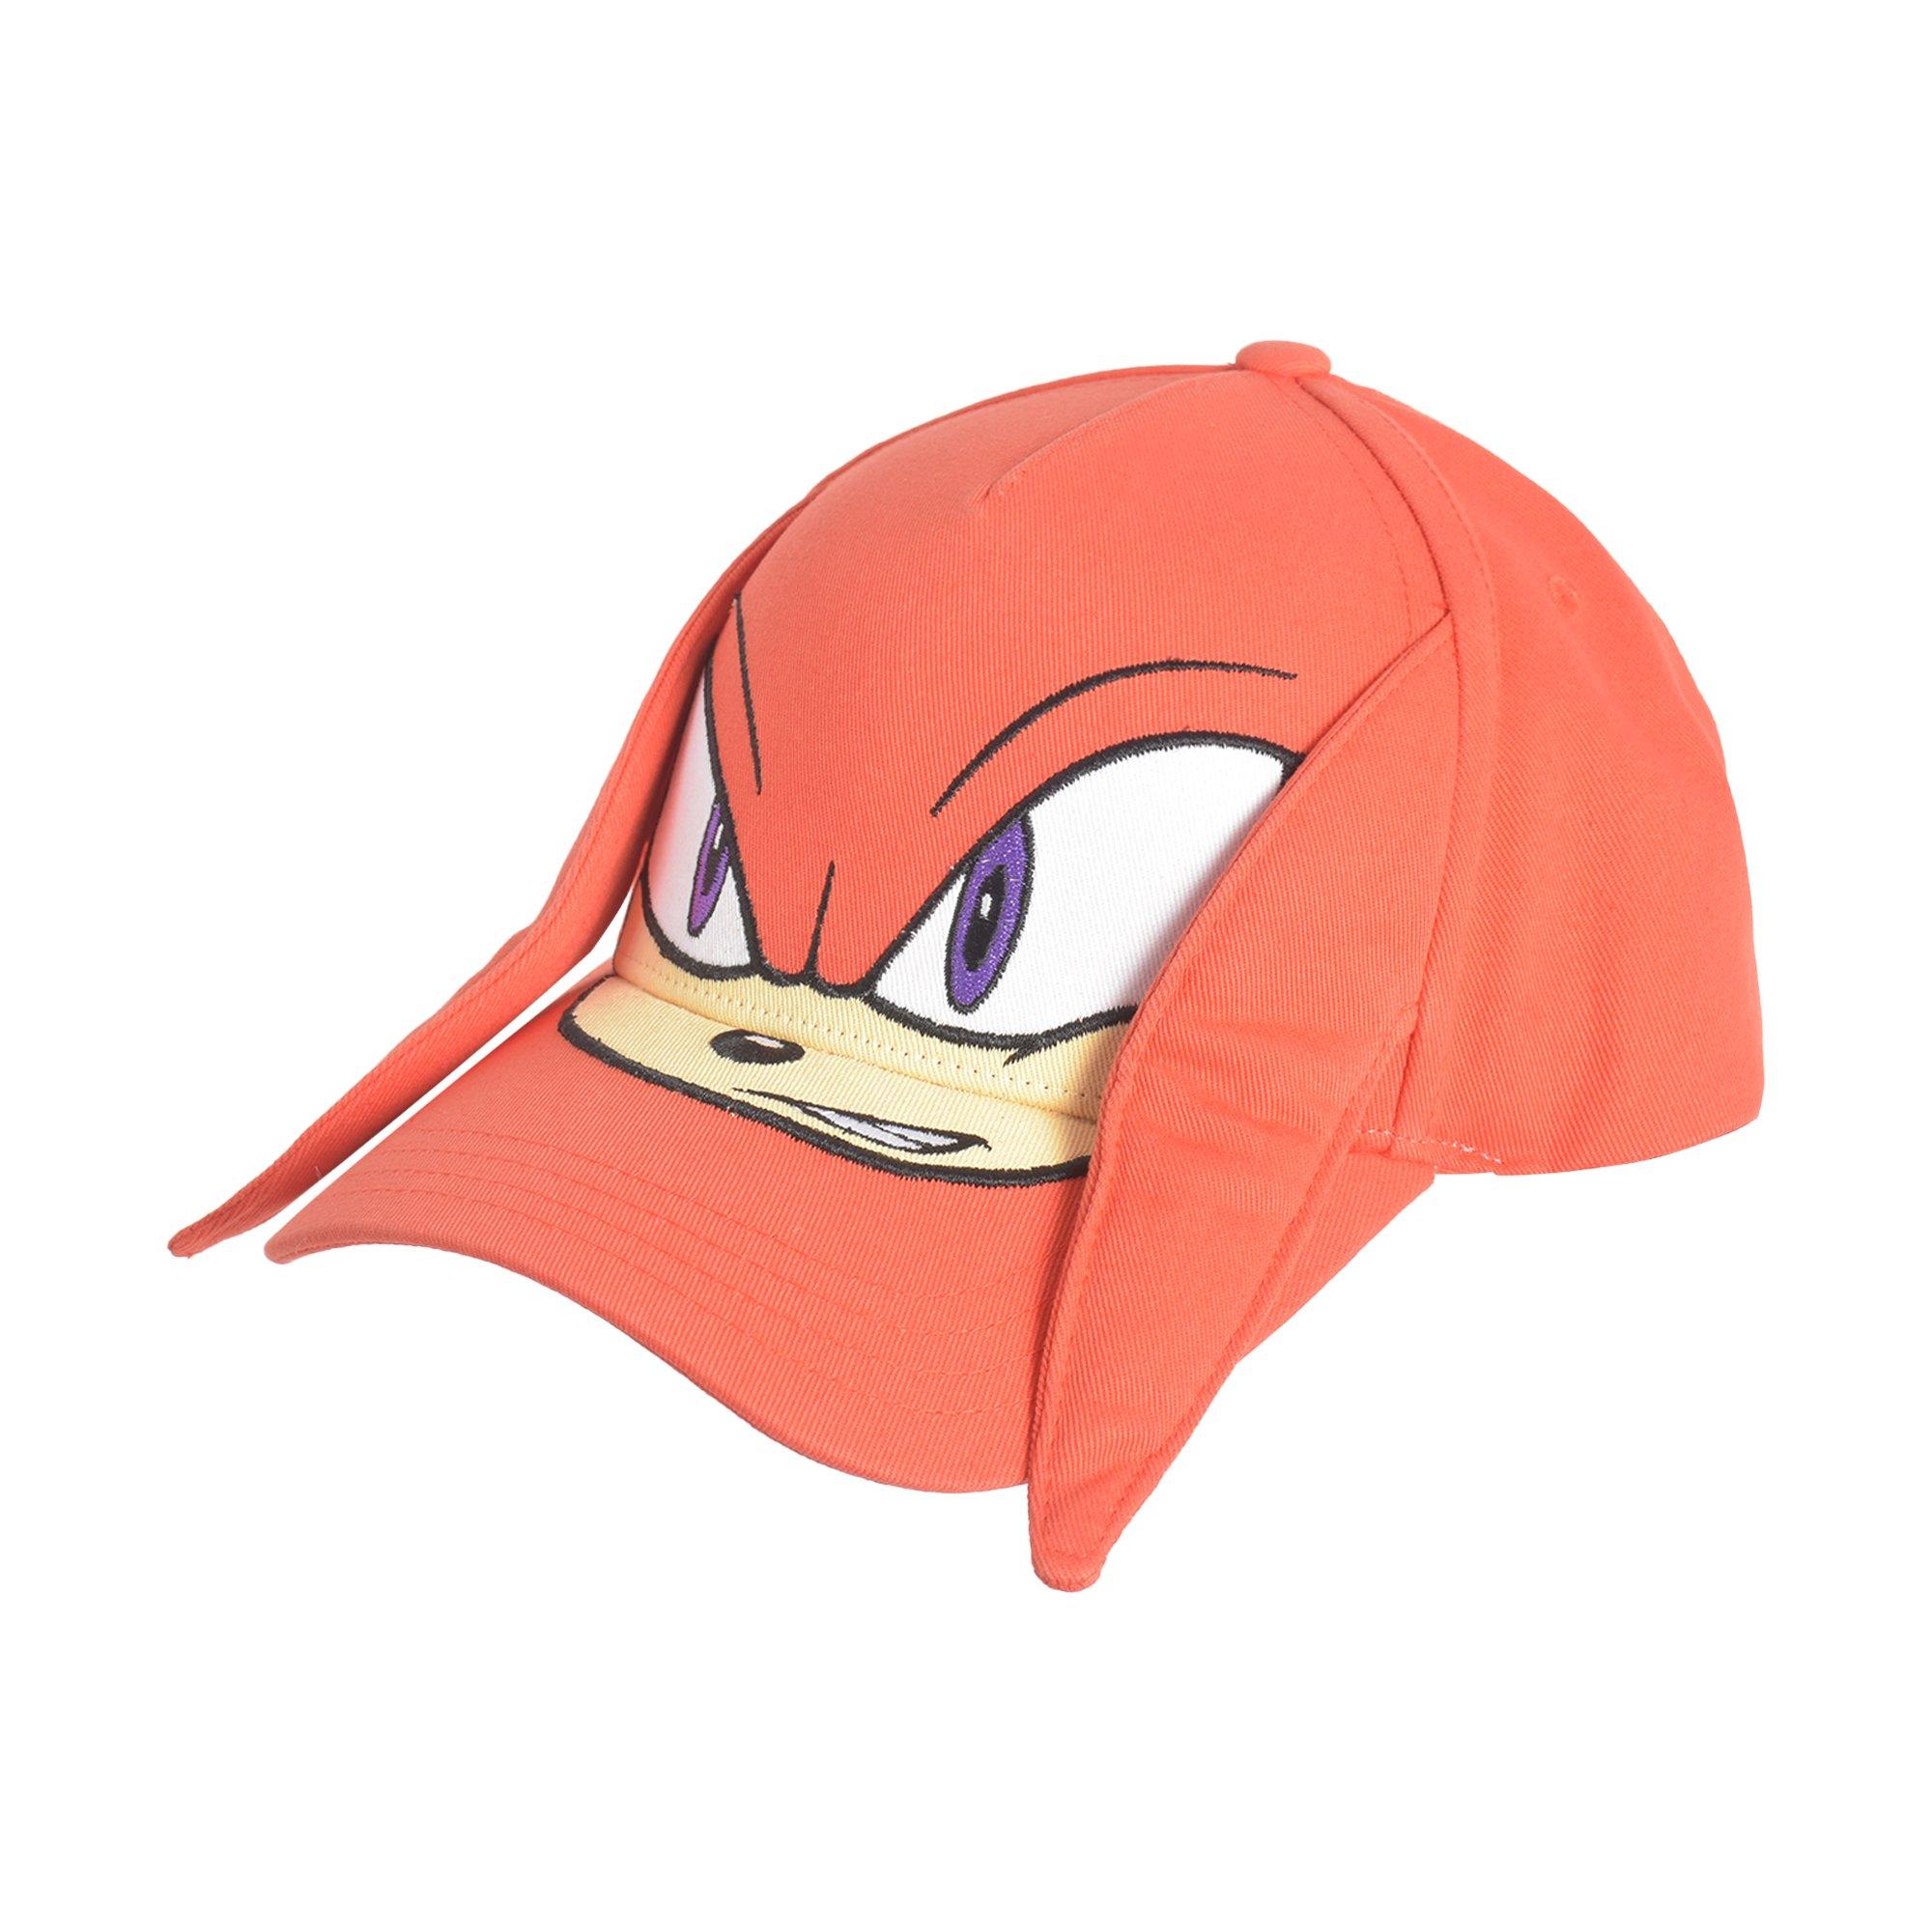 Sonic the Hedghog Knuckles 3D Quills Face Snapback Hat with Ears